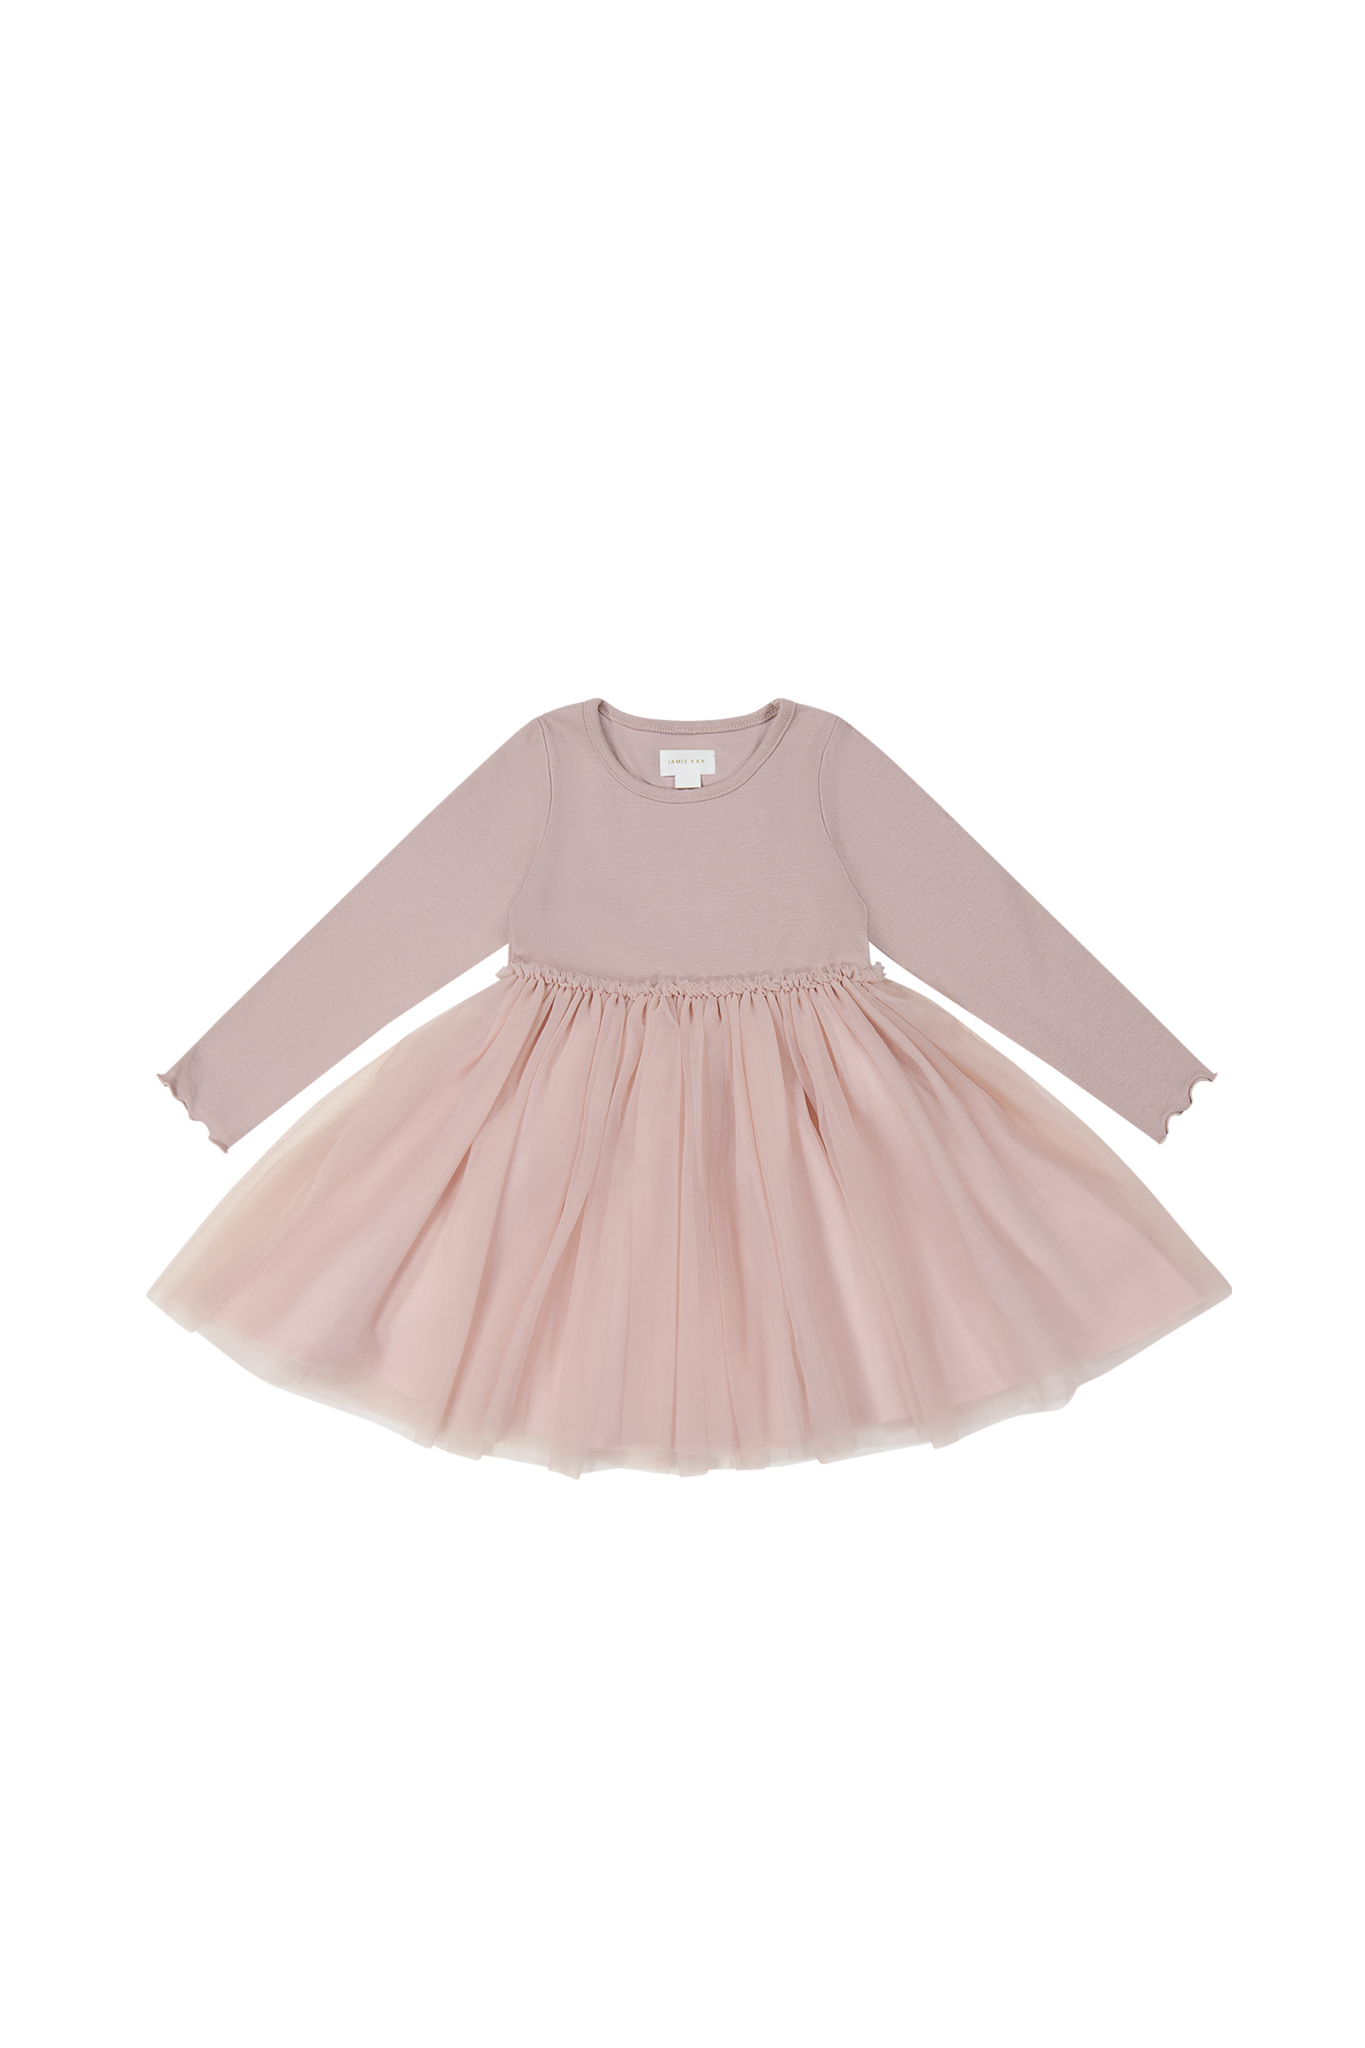 Jamie Kay Anna Tulle Dress in Shell Pink